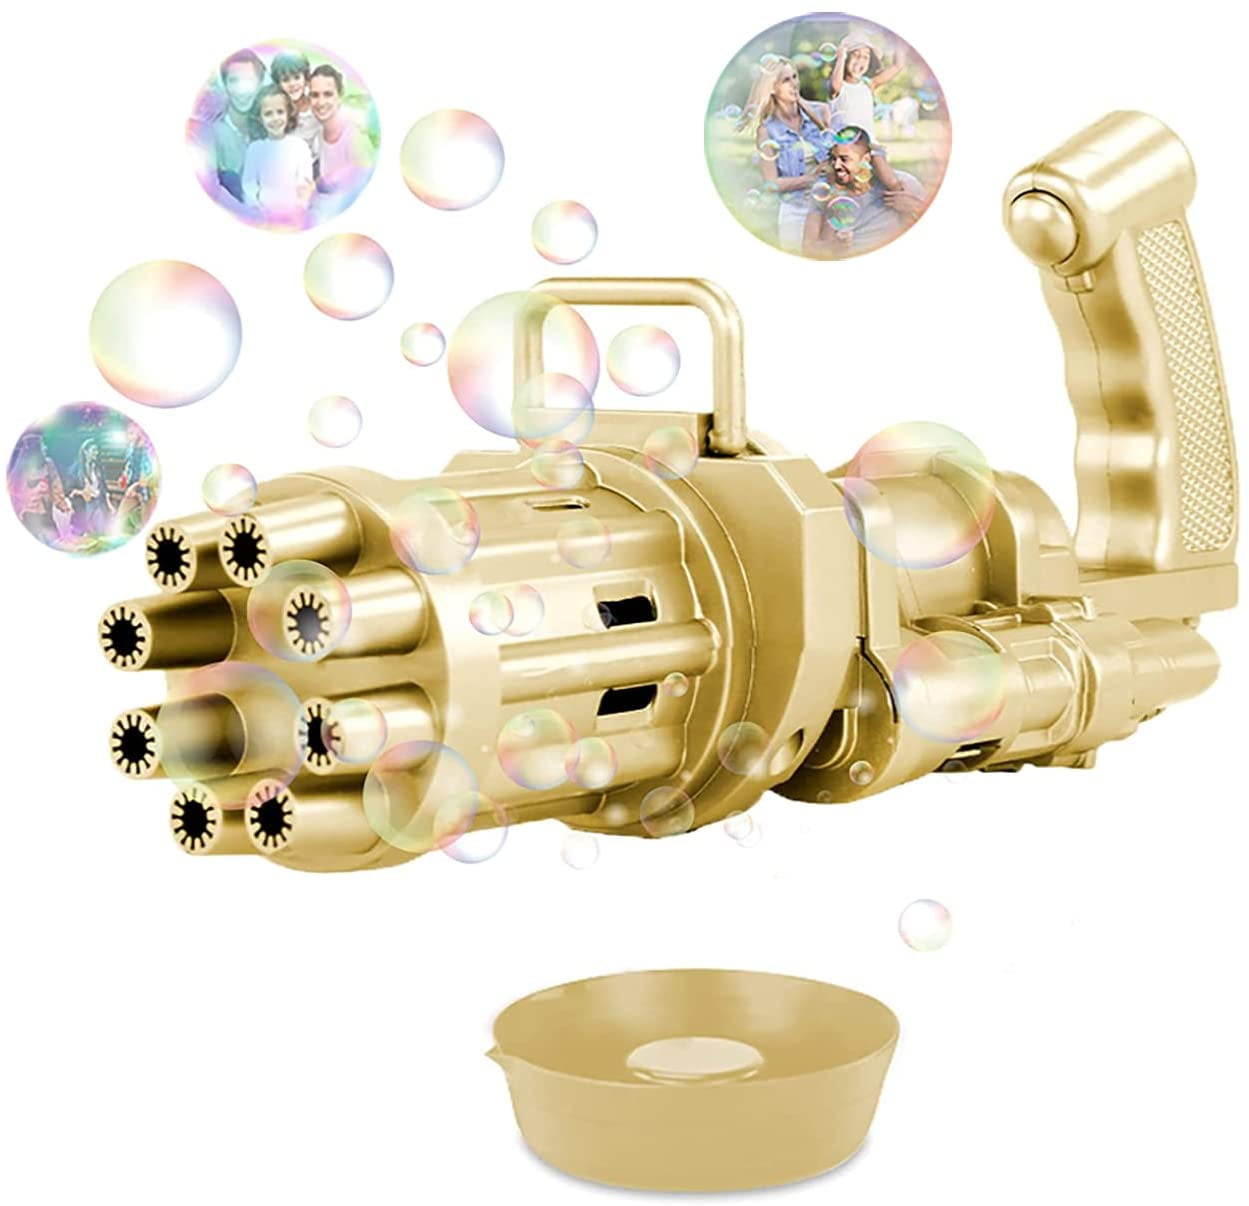 Bubble Gatling bubble gun, Gatling bubble machine 2021 cool toys and gifts,  8 hole large bubble machine, strong, requires 3 AA batteries, children's bubble  gun, suitable for summer outdoor activities - Walmart.com